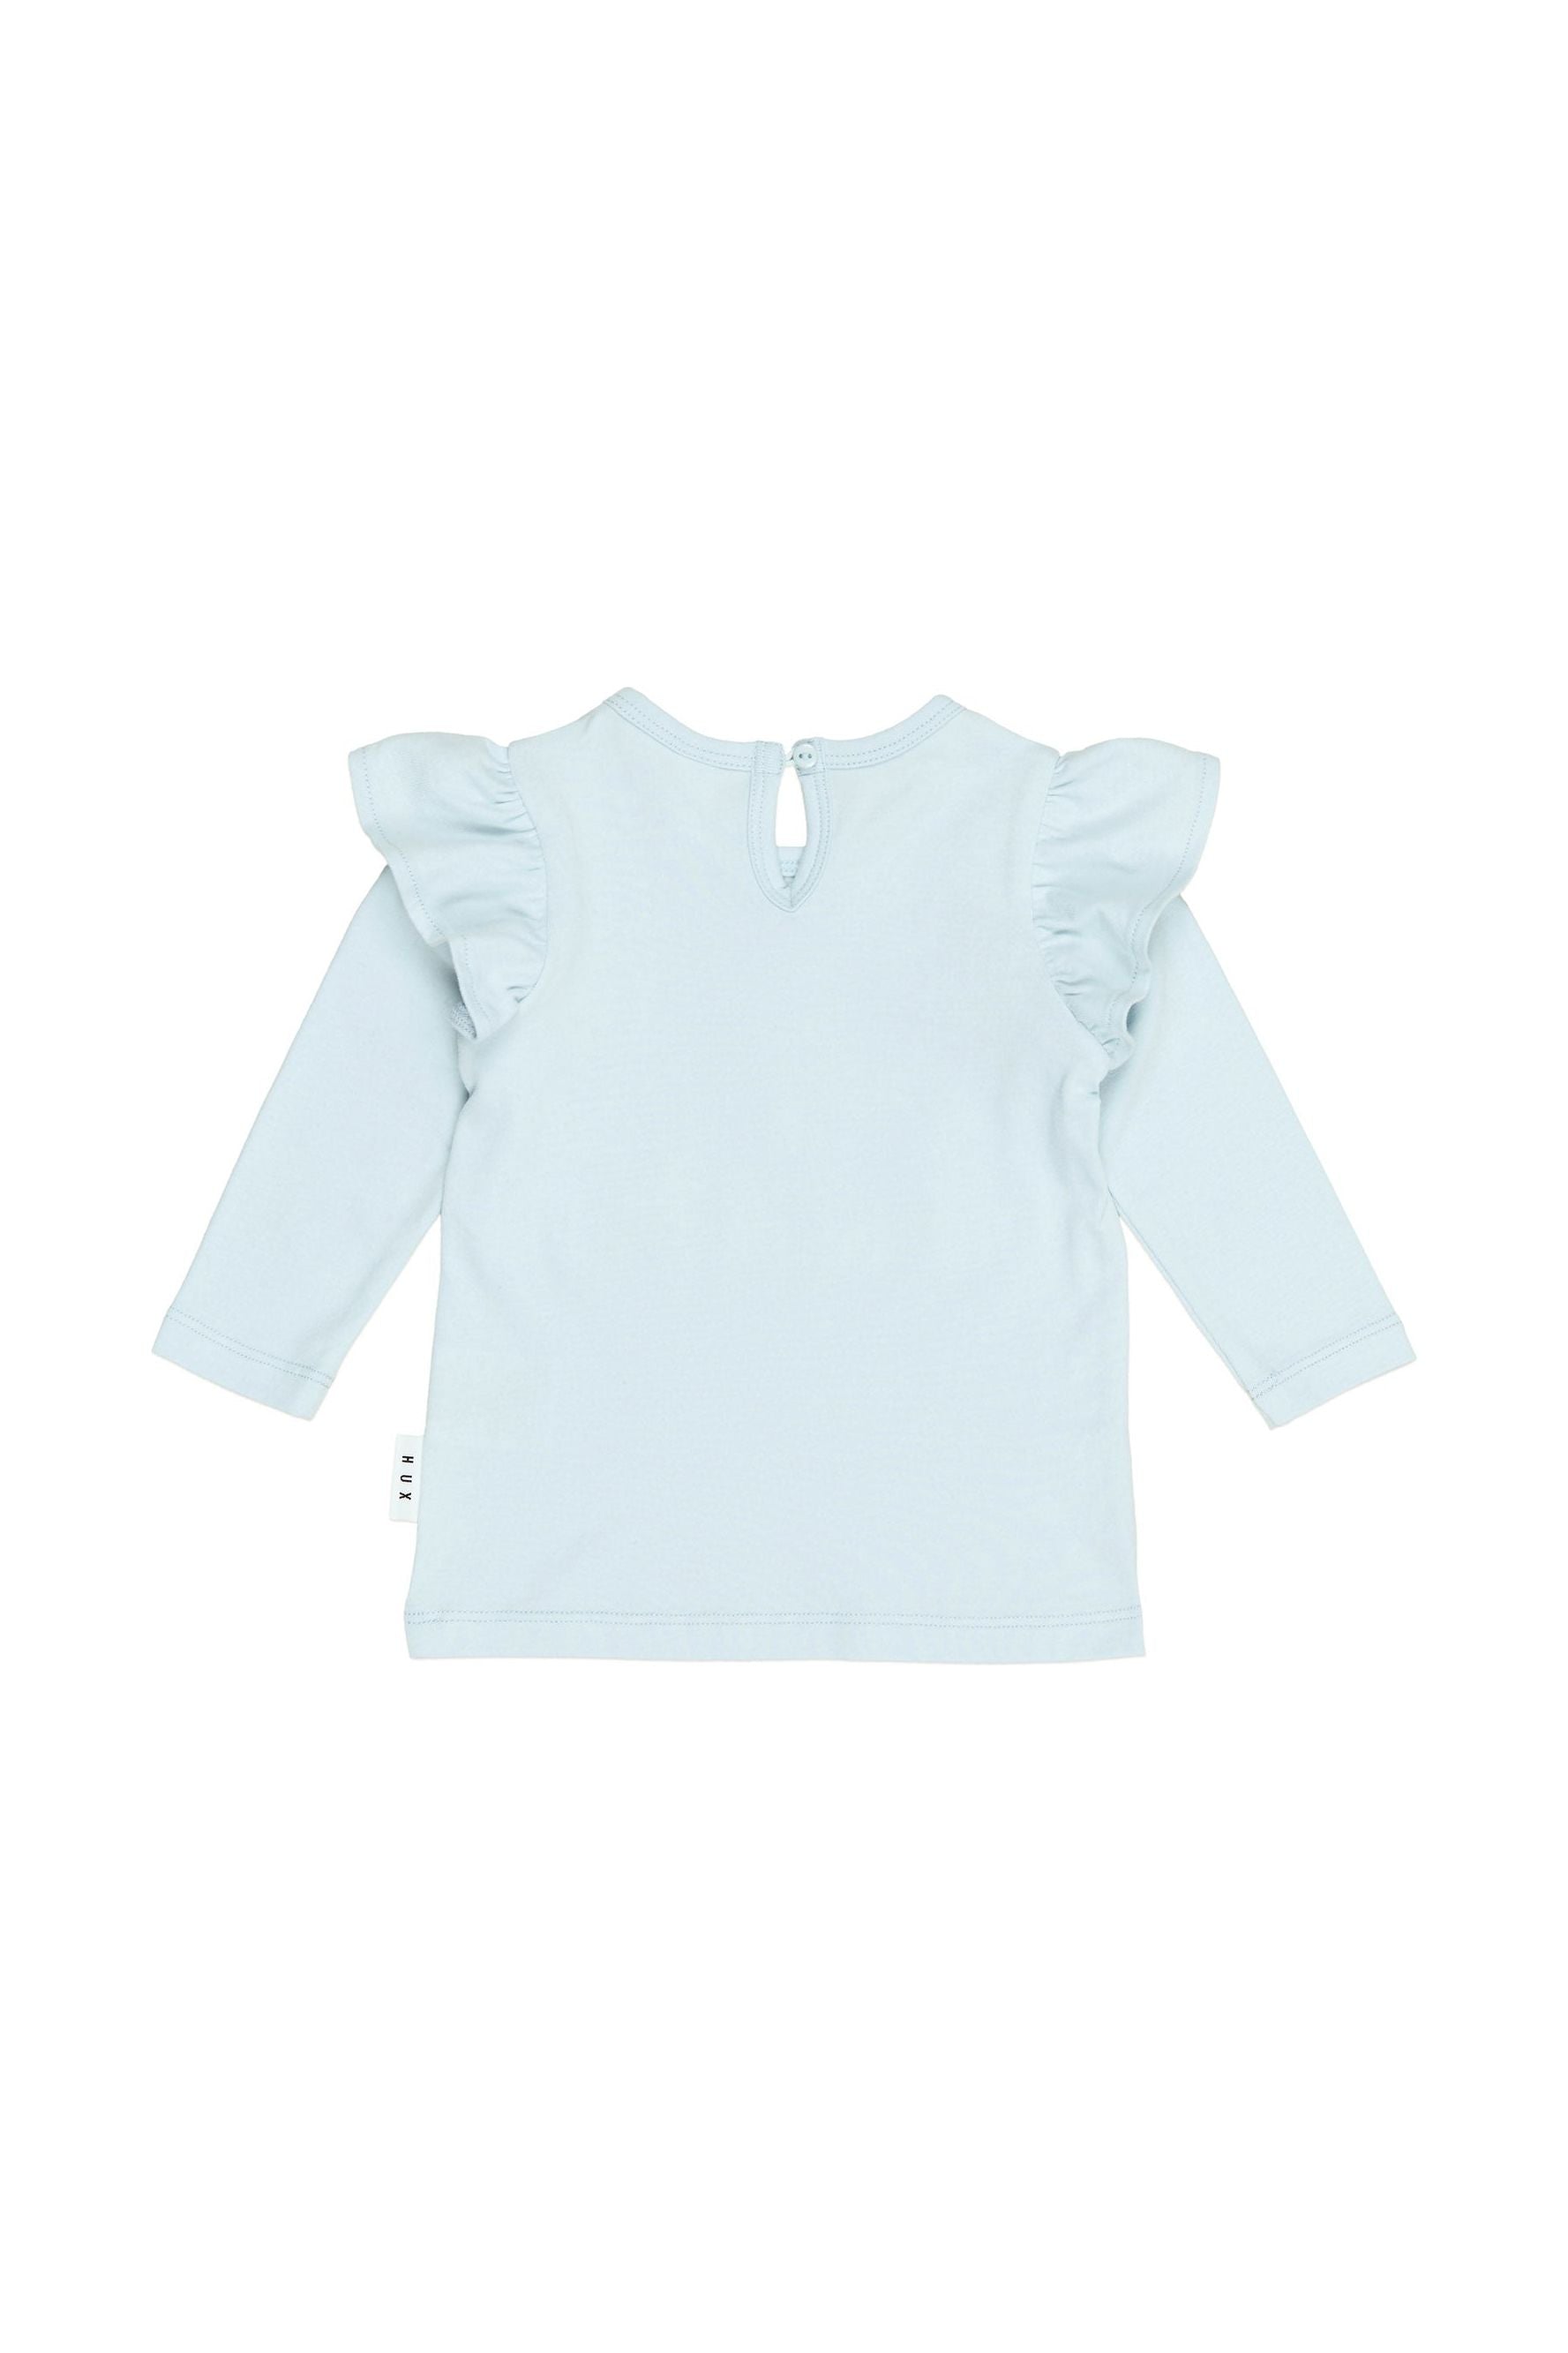 ENCHANTED FRIENDS FRILL TOP